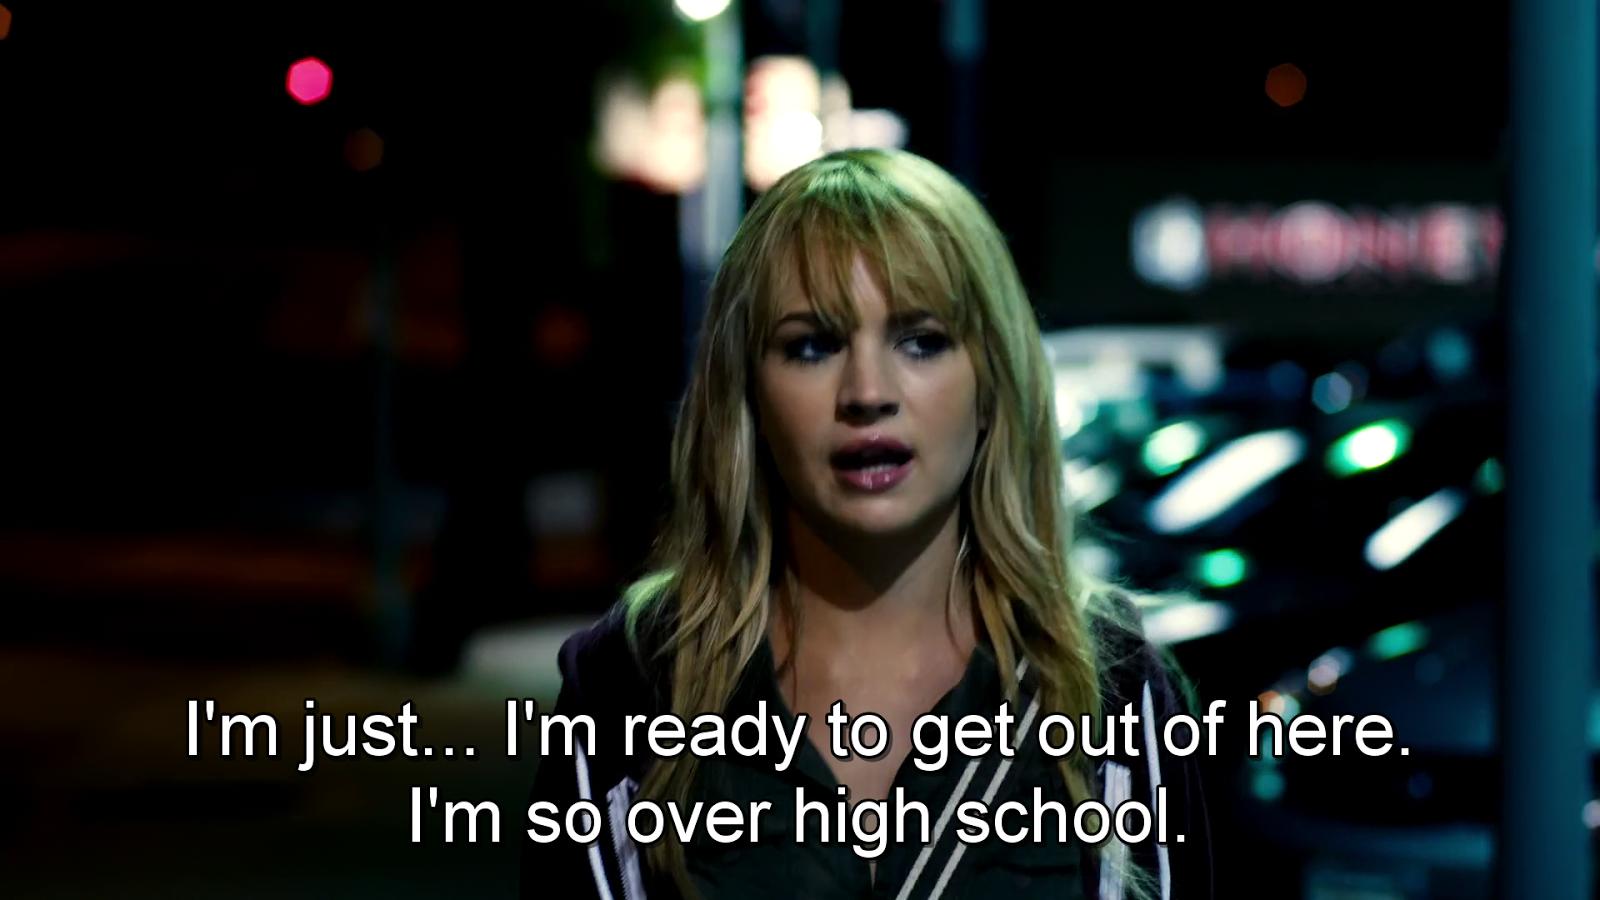 Britt Robertson in The First Time